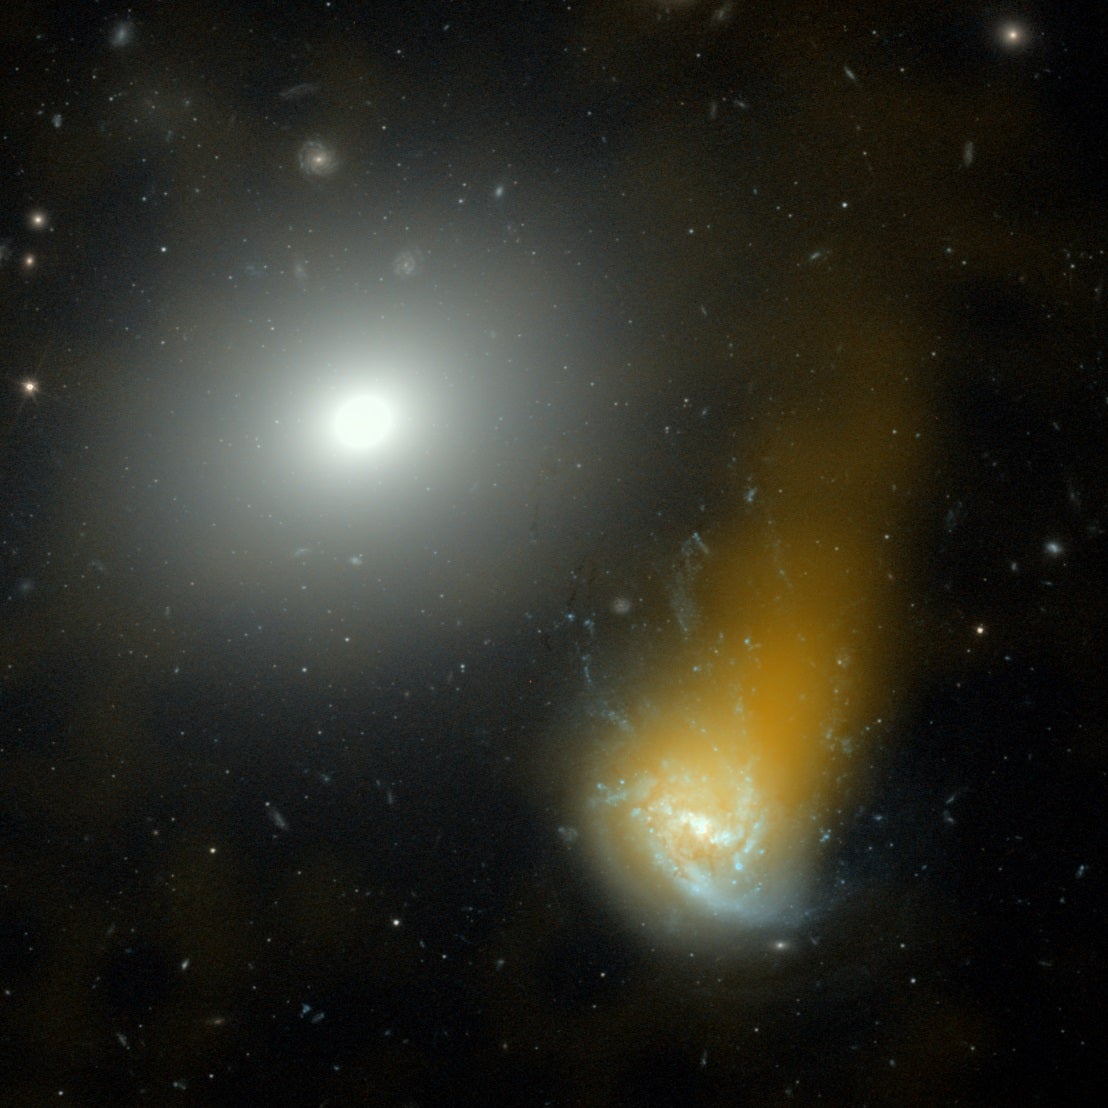 An image of the “jellyfish galaxy” NGC 4858 combining optical and radio telescope images.